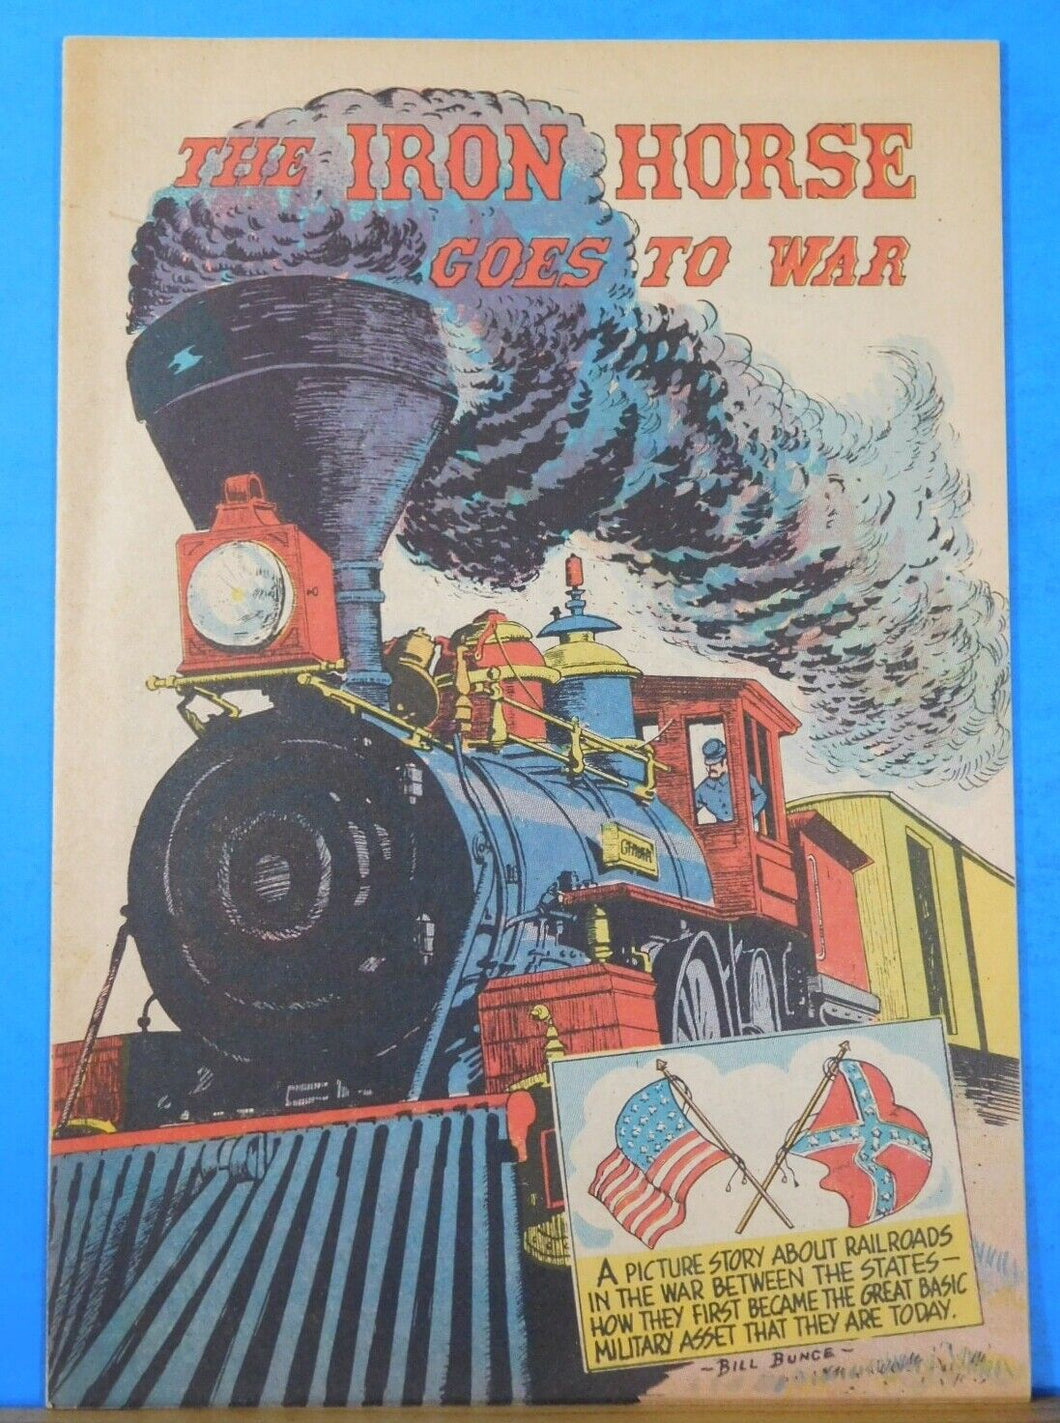 Iron Horse, The Goes to War by Bill Bunce  AAR 1960 Comic Book